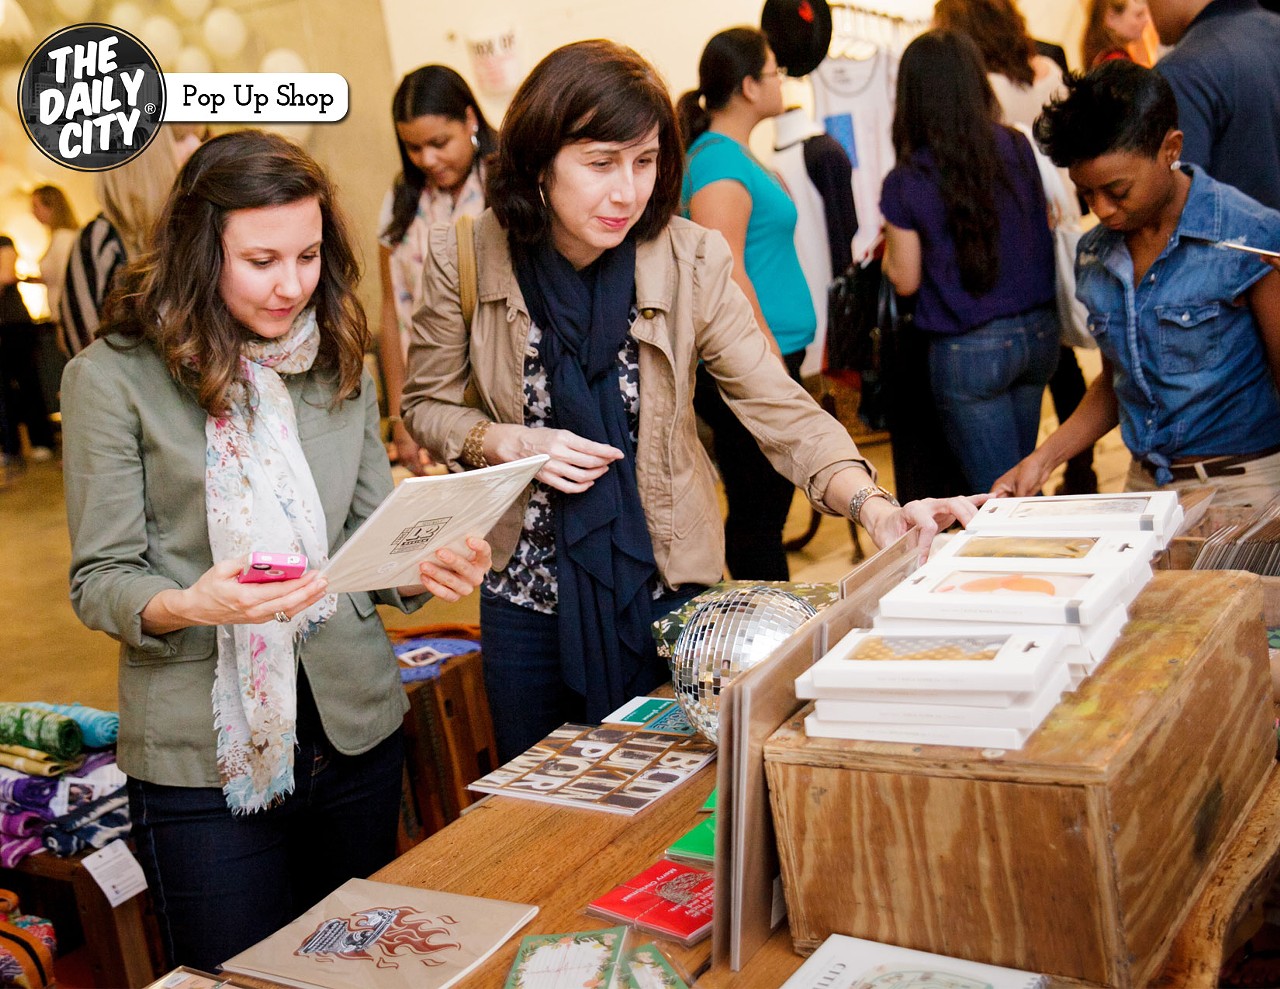 Begins Wednesday, Sept. 3The Daily City Pop-up ShopThirty local brands of paper and leather goods, food, clothing and accessories. Plus shuffleboard!